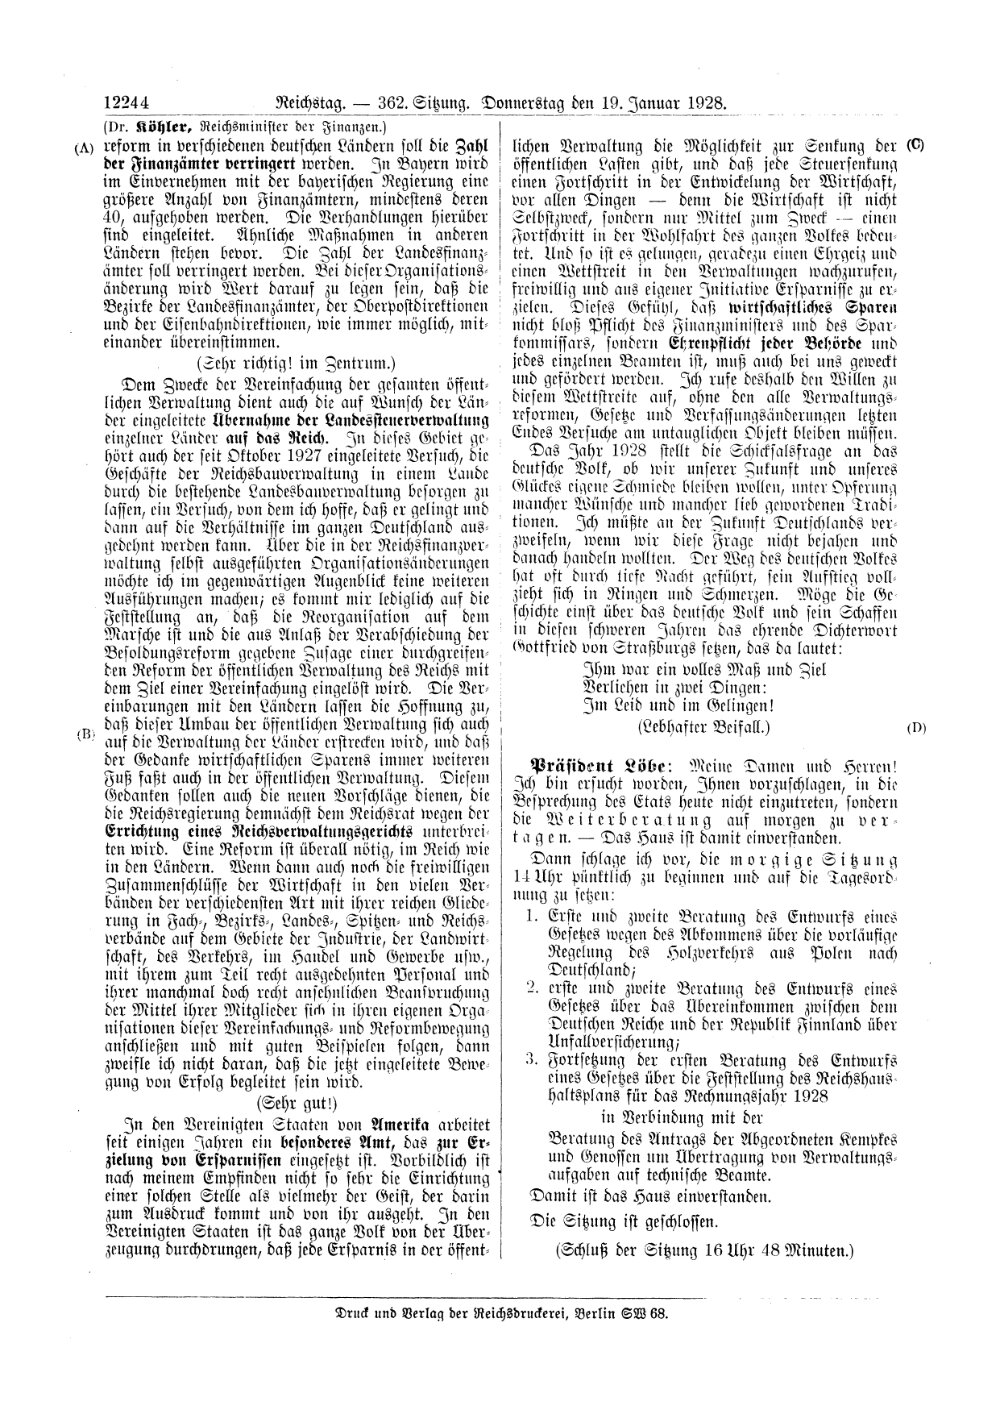 Scan of page 12244